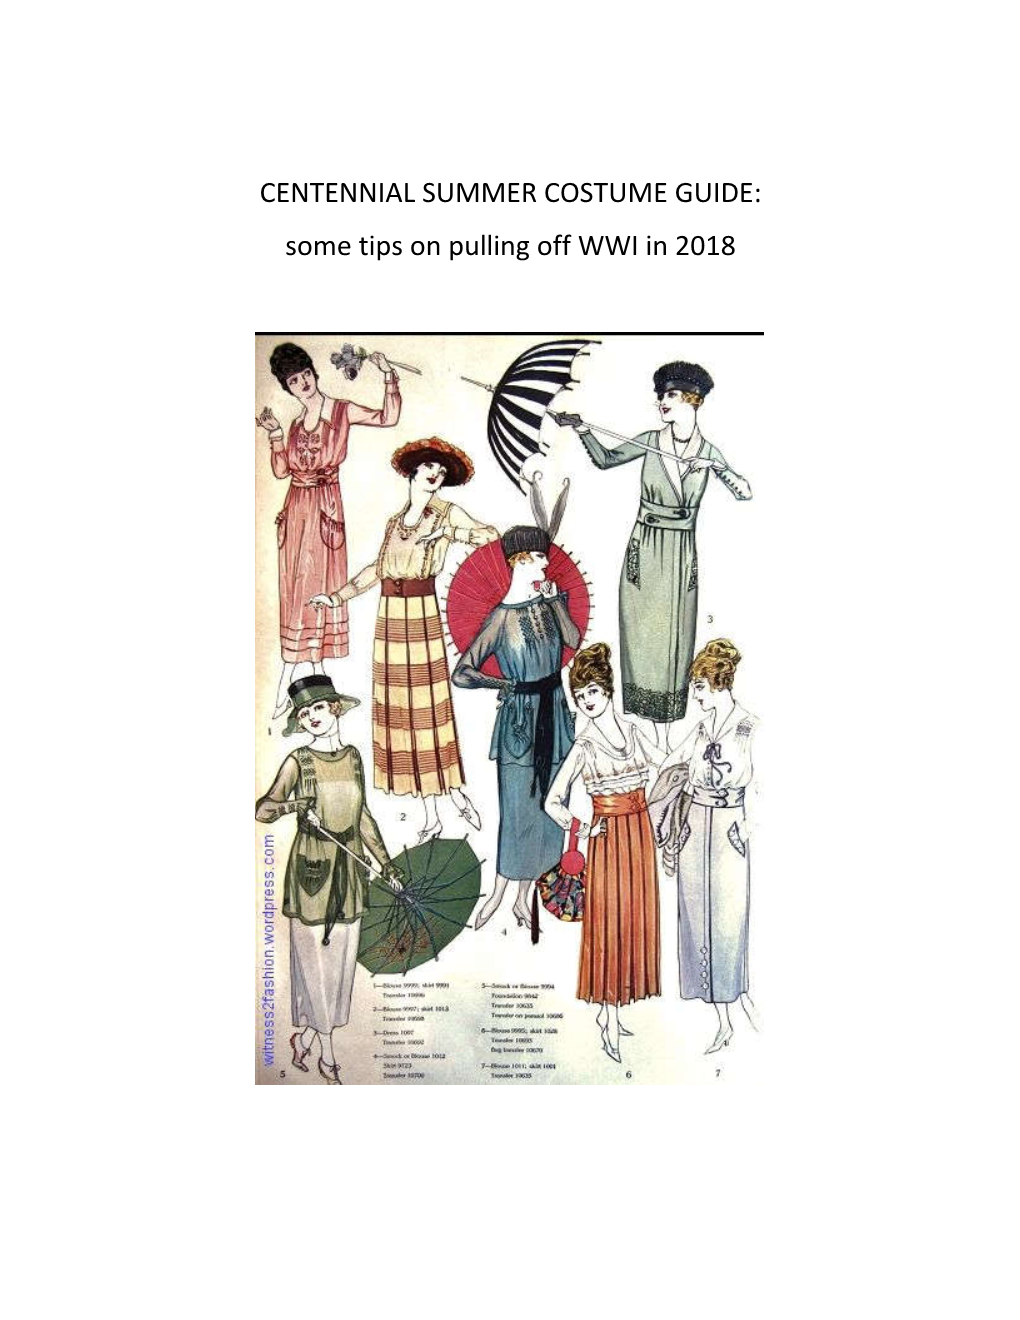 CENTENNIAL SUMMER COSTUME GUIDE: Some Tips on Pulling Off WWI in 2018